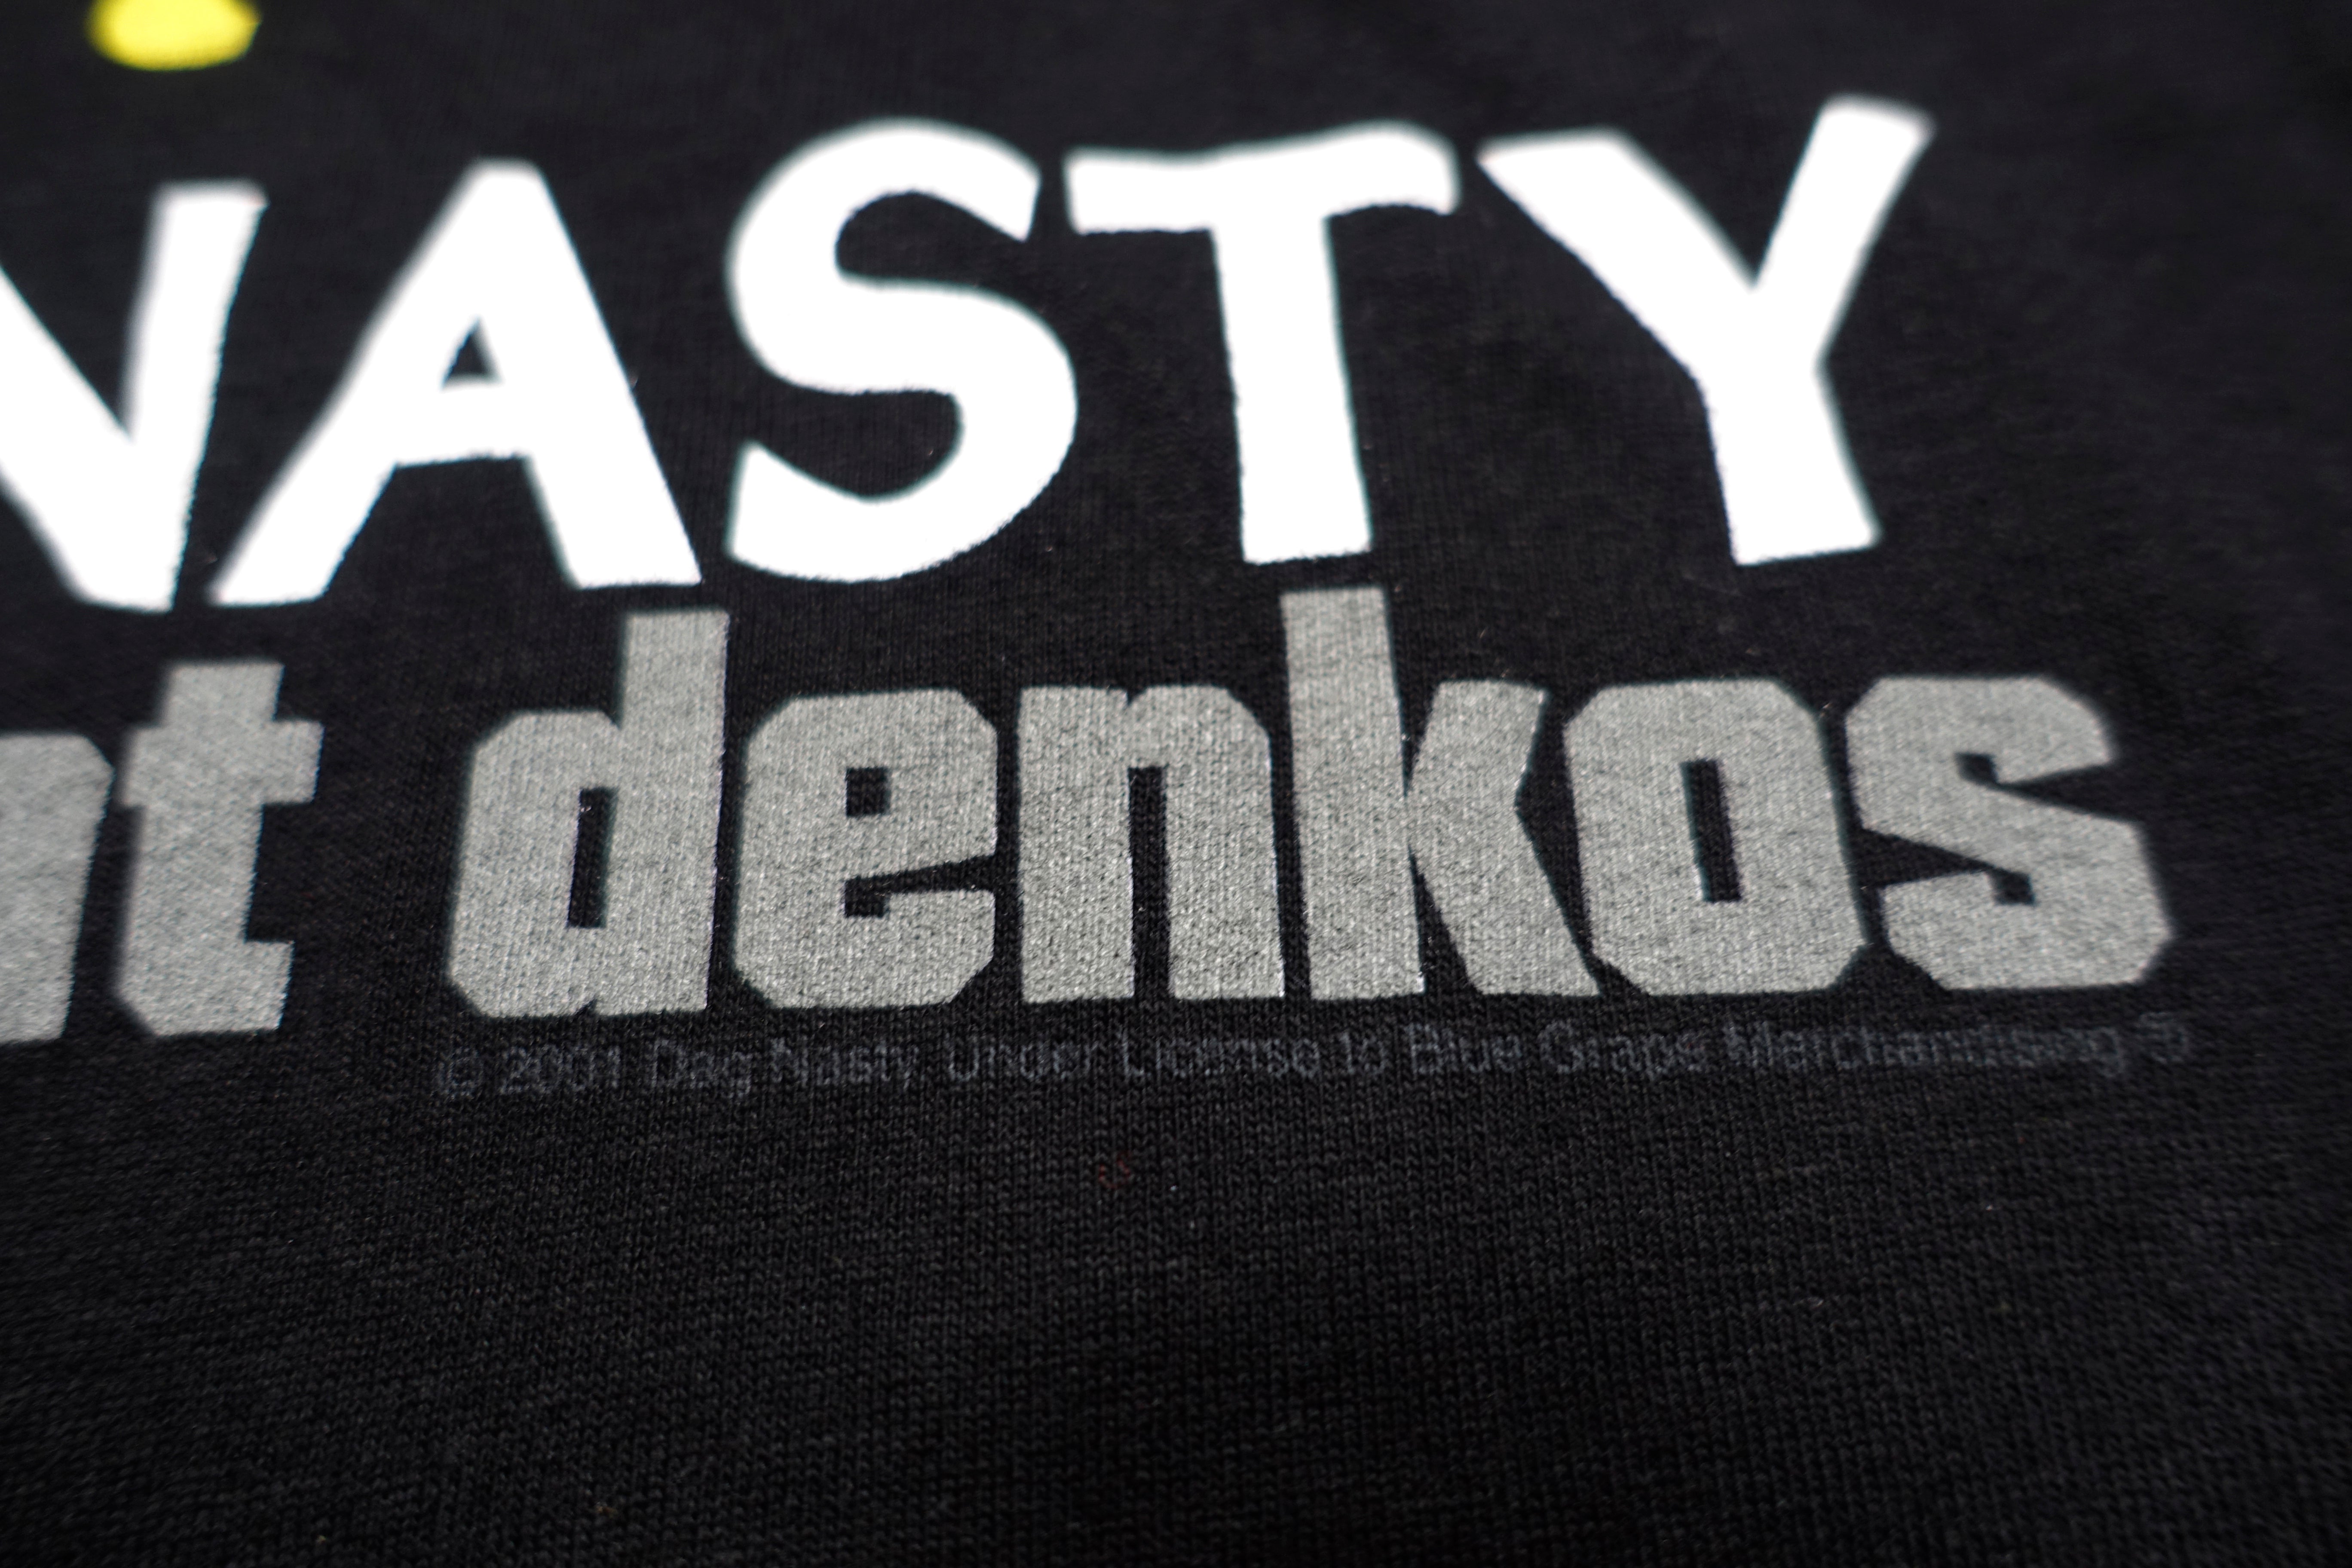 Dag Nasty - Wig Out At Denko's 2001 Tour Shirt Size Large